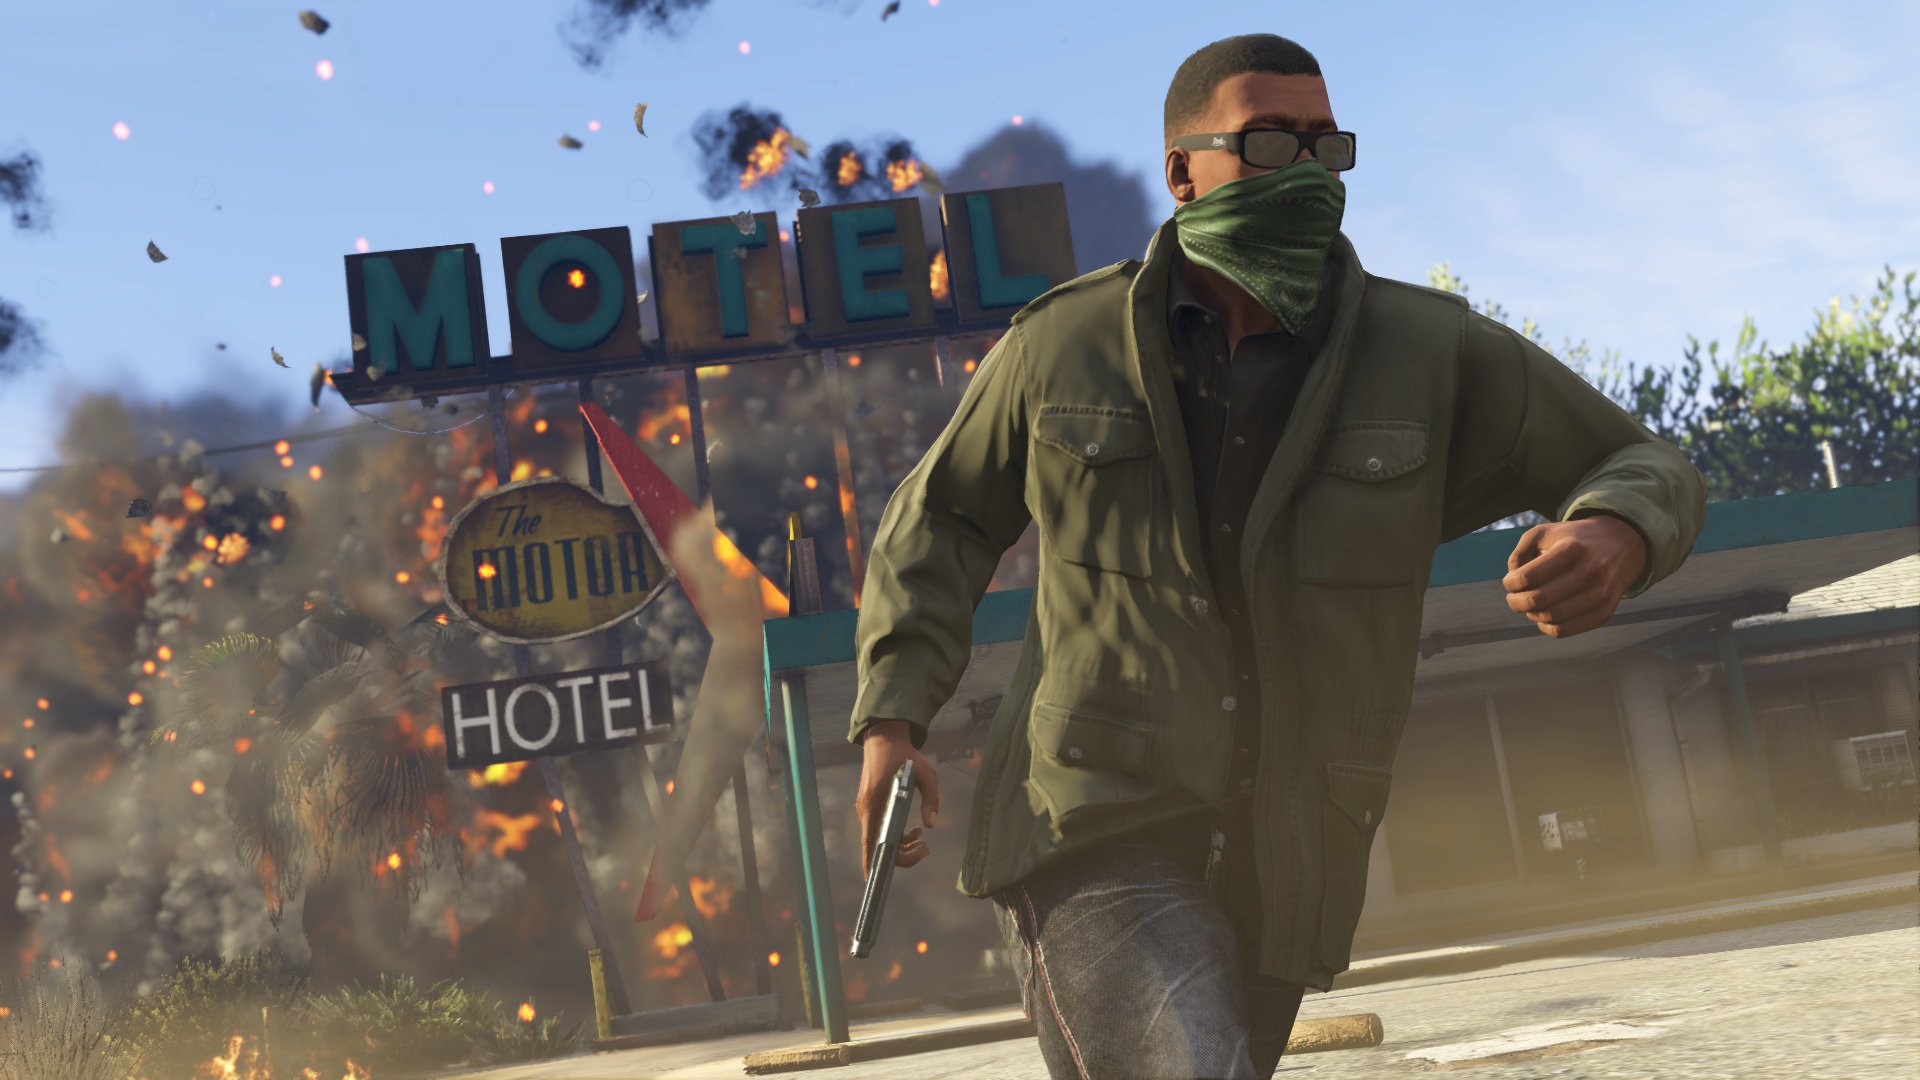 Rockstar owner discusses remastering strategy, says he is not interested in ‘simple ports’